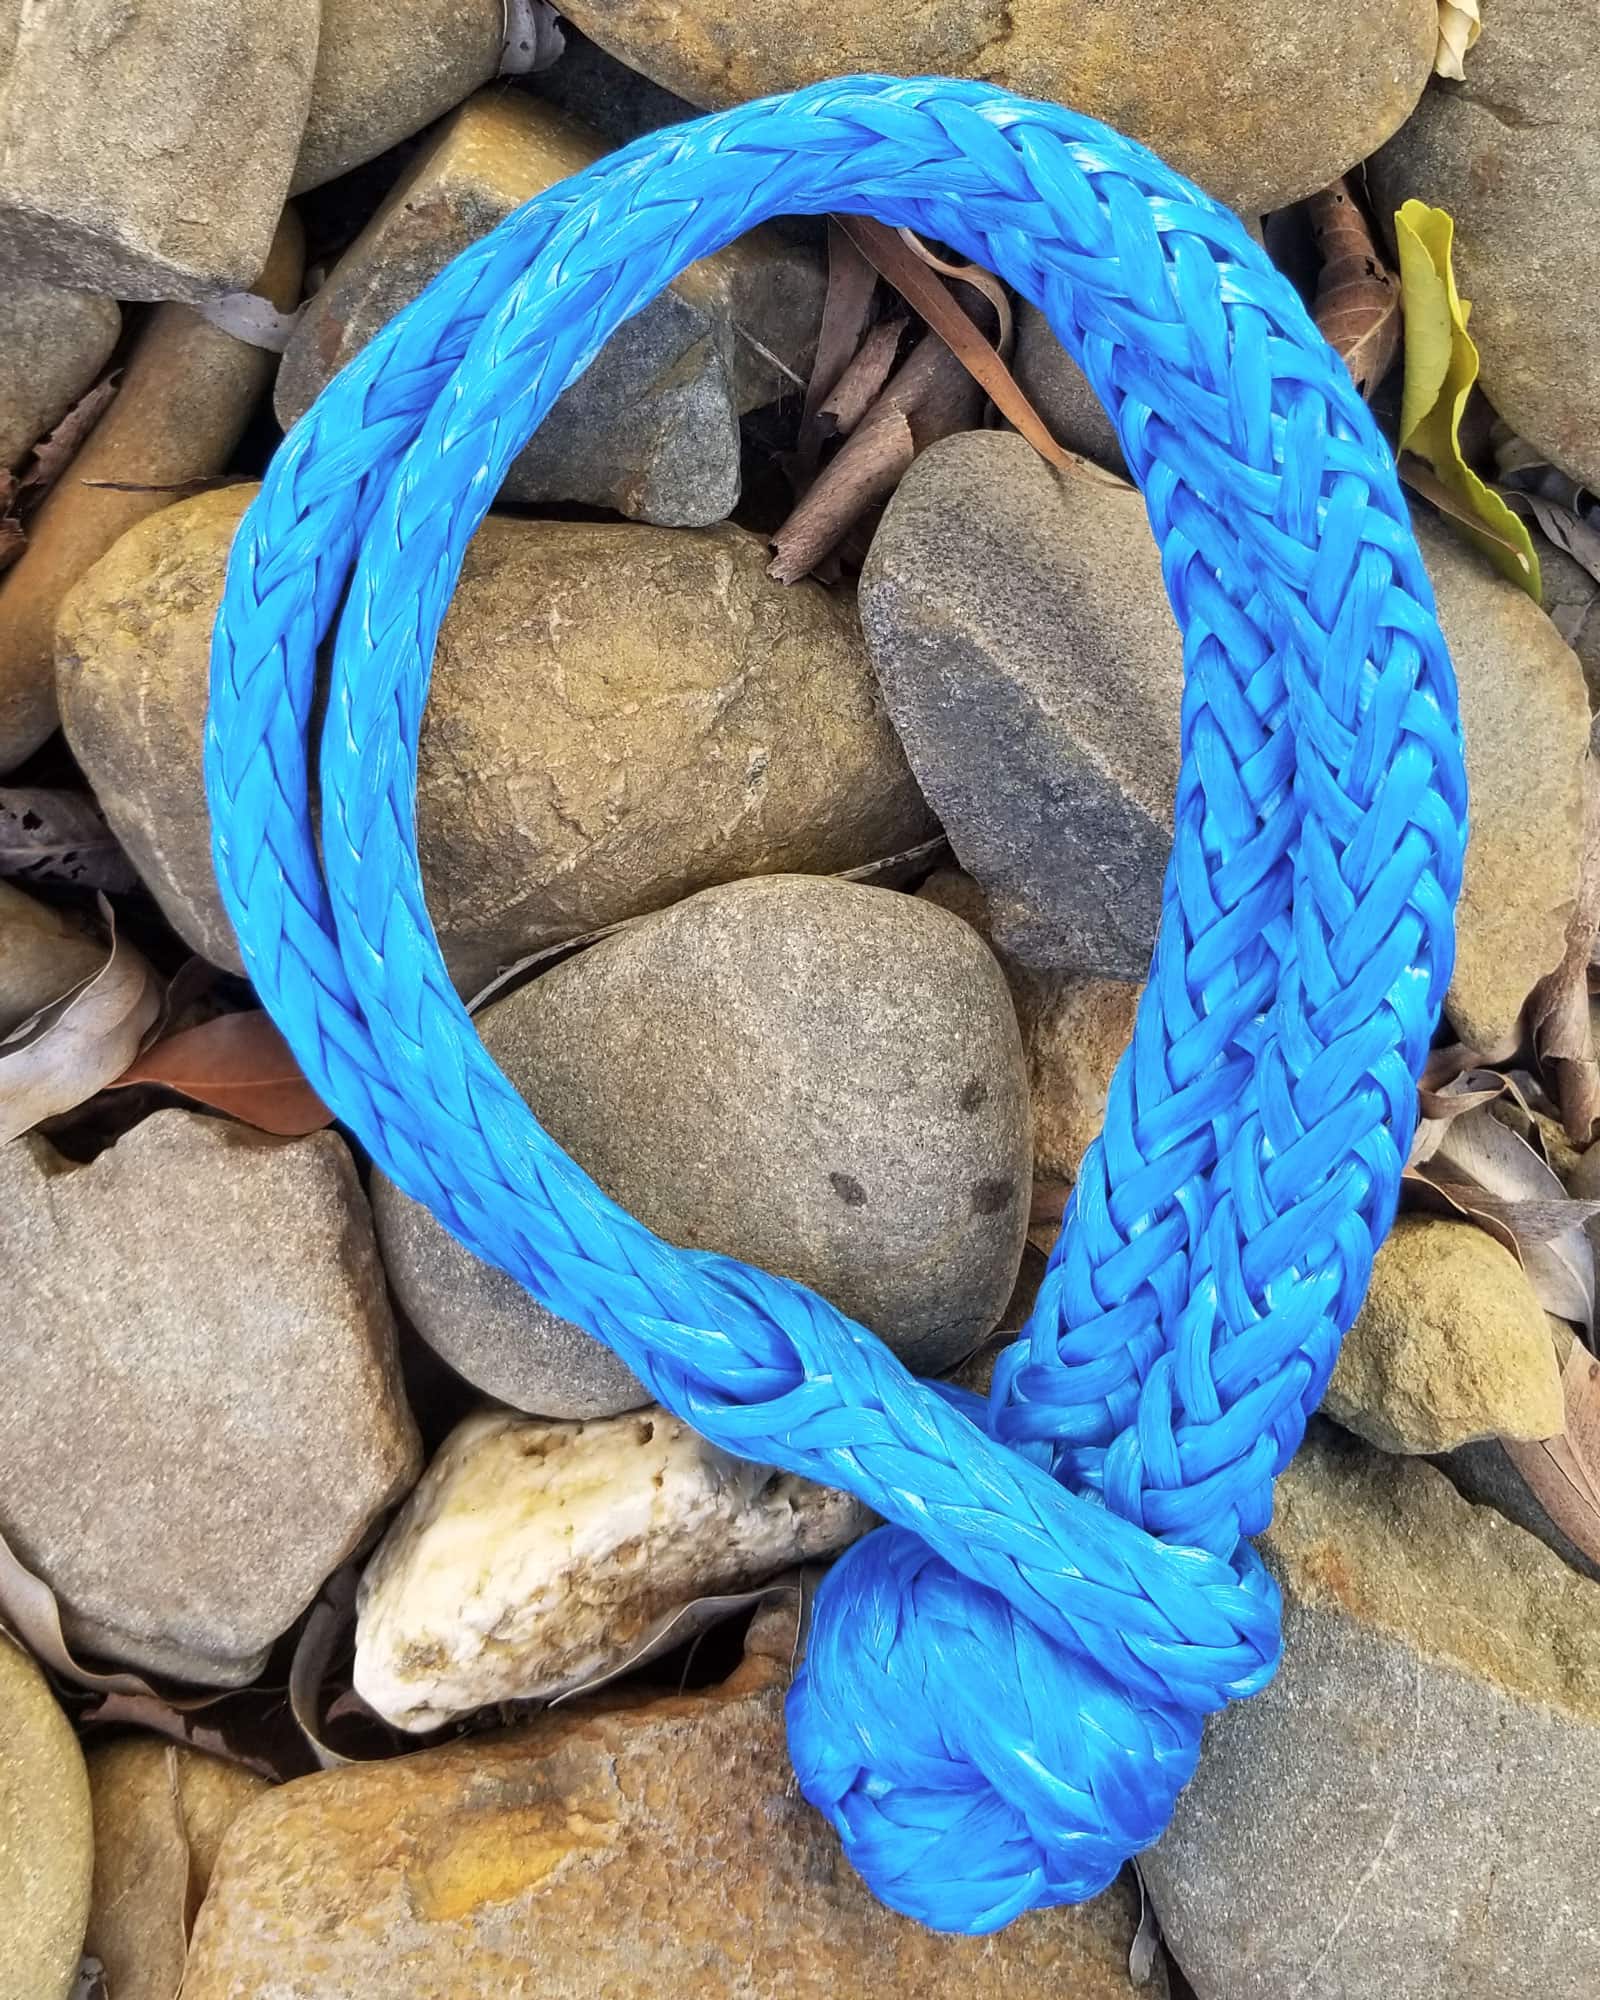 Saber Offroad Shackles for a Cause – BLUE (Autism Support) | Saber Offroad